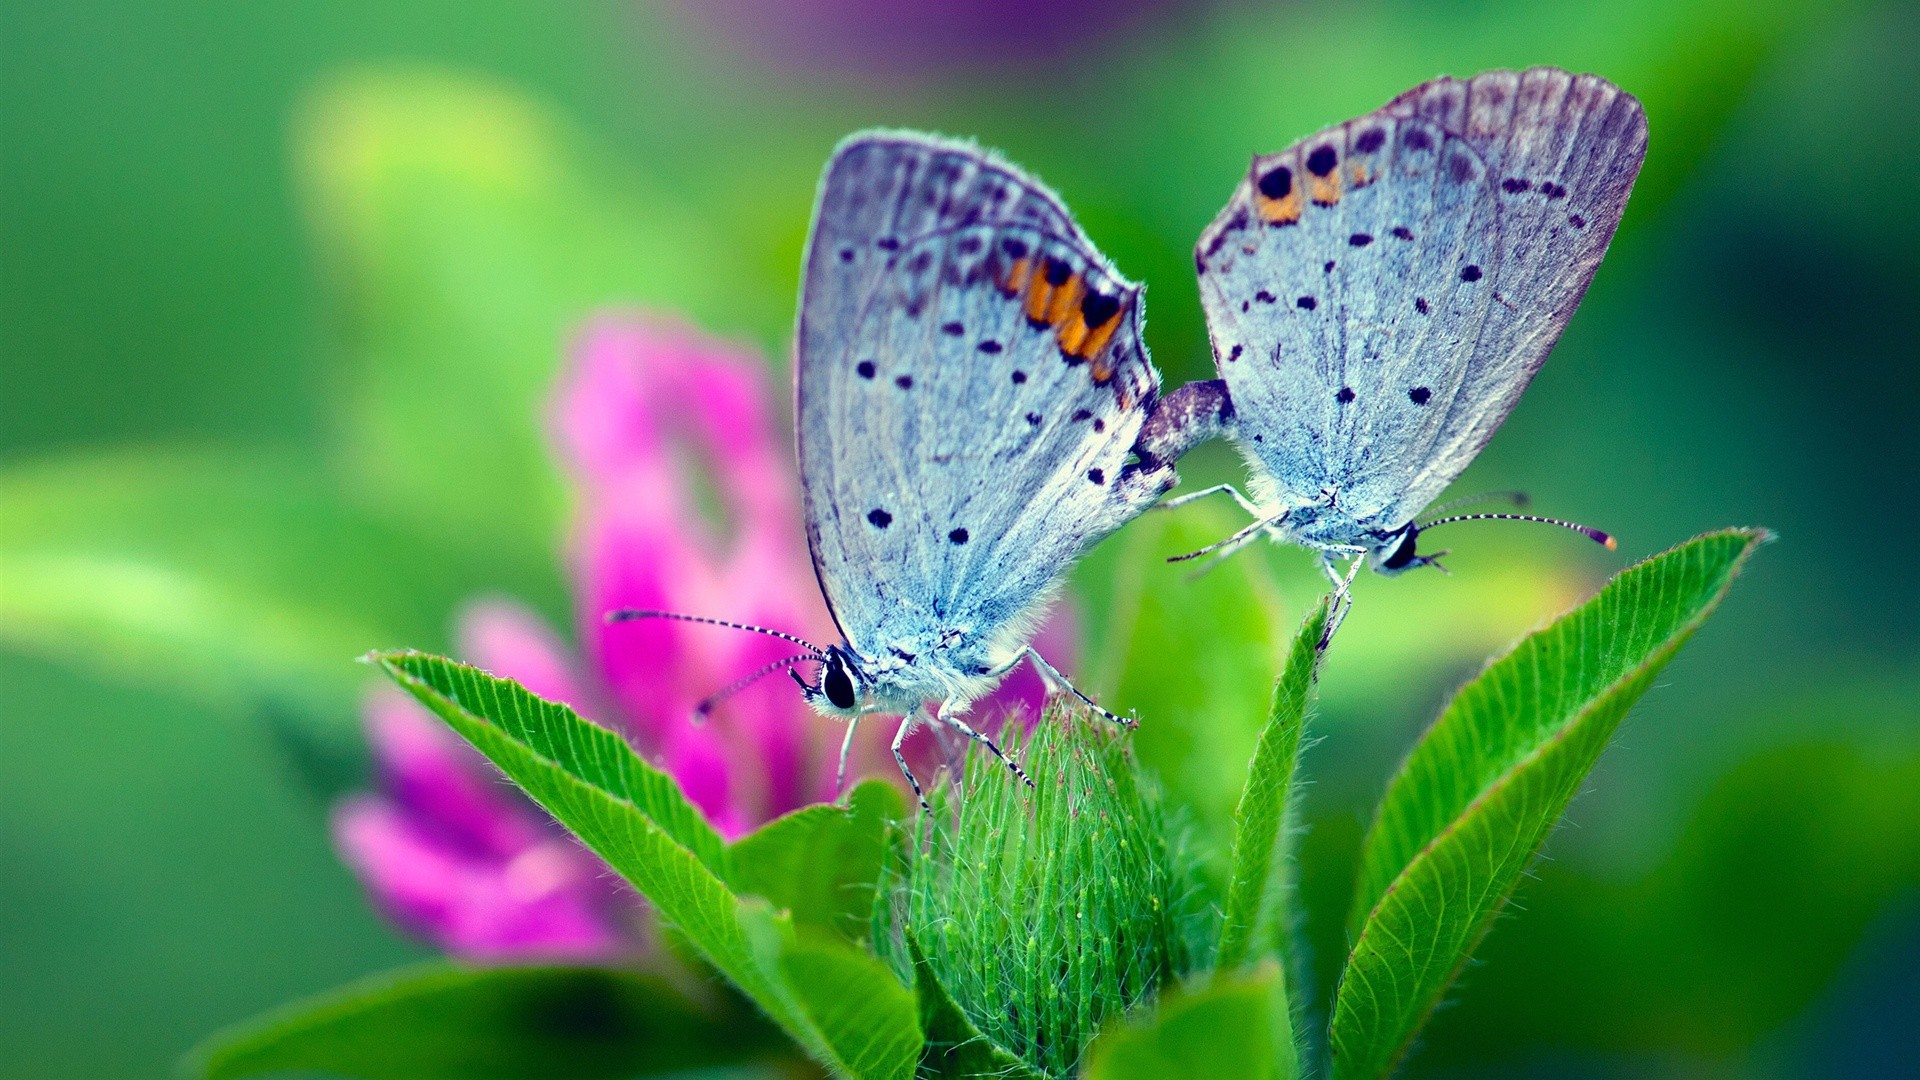 A pair of butterflies wallpapers and images - wallpapers, pictures ...